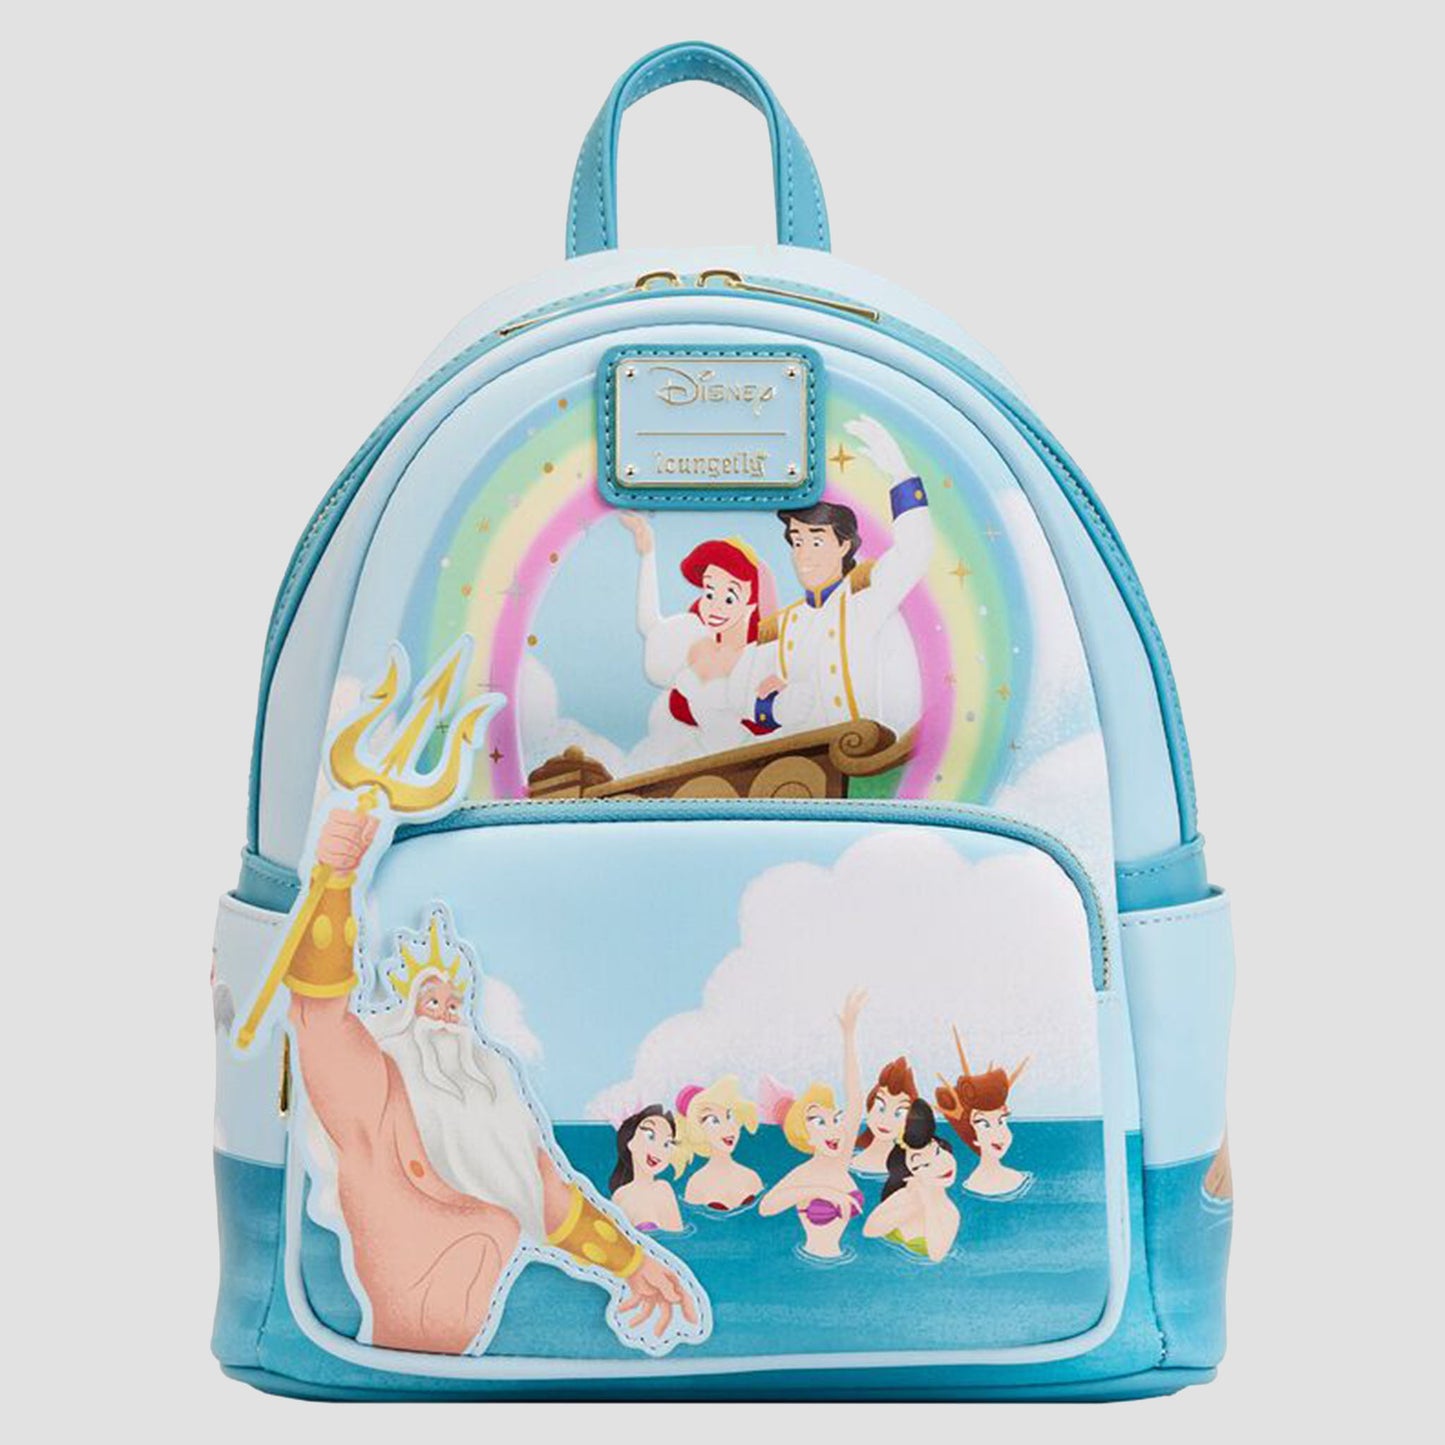 Triton's Gift (The Little Mermaid) Disney Mini Backpack by Loungefly